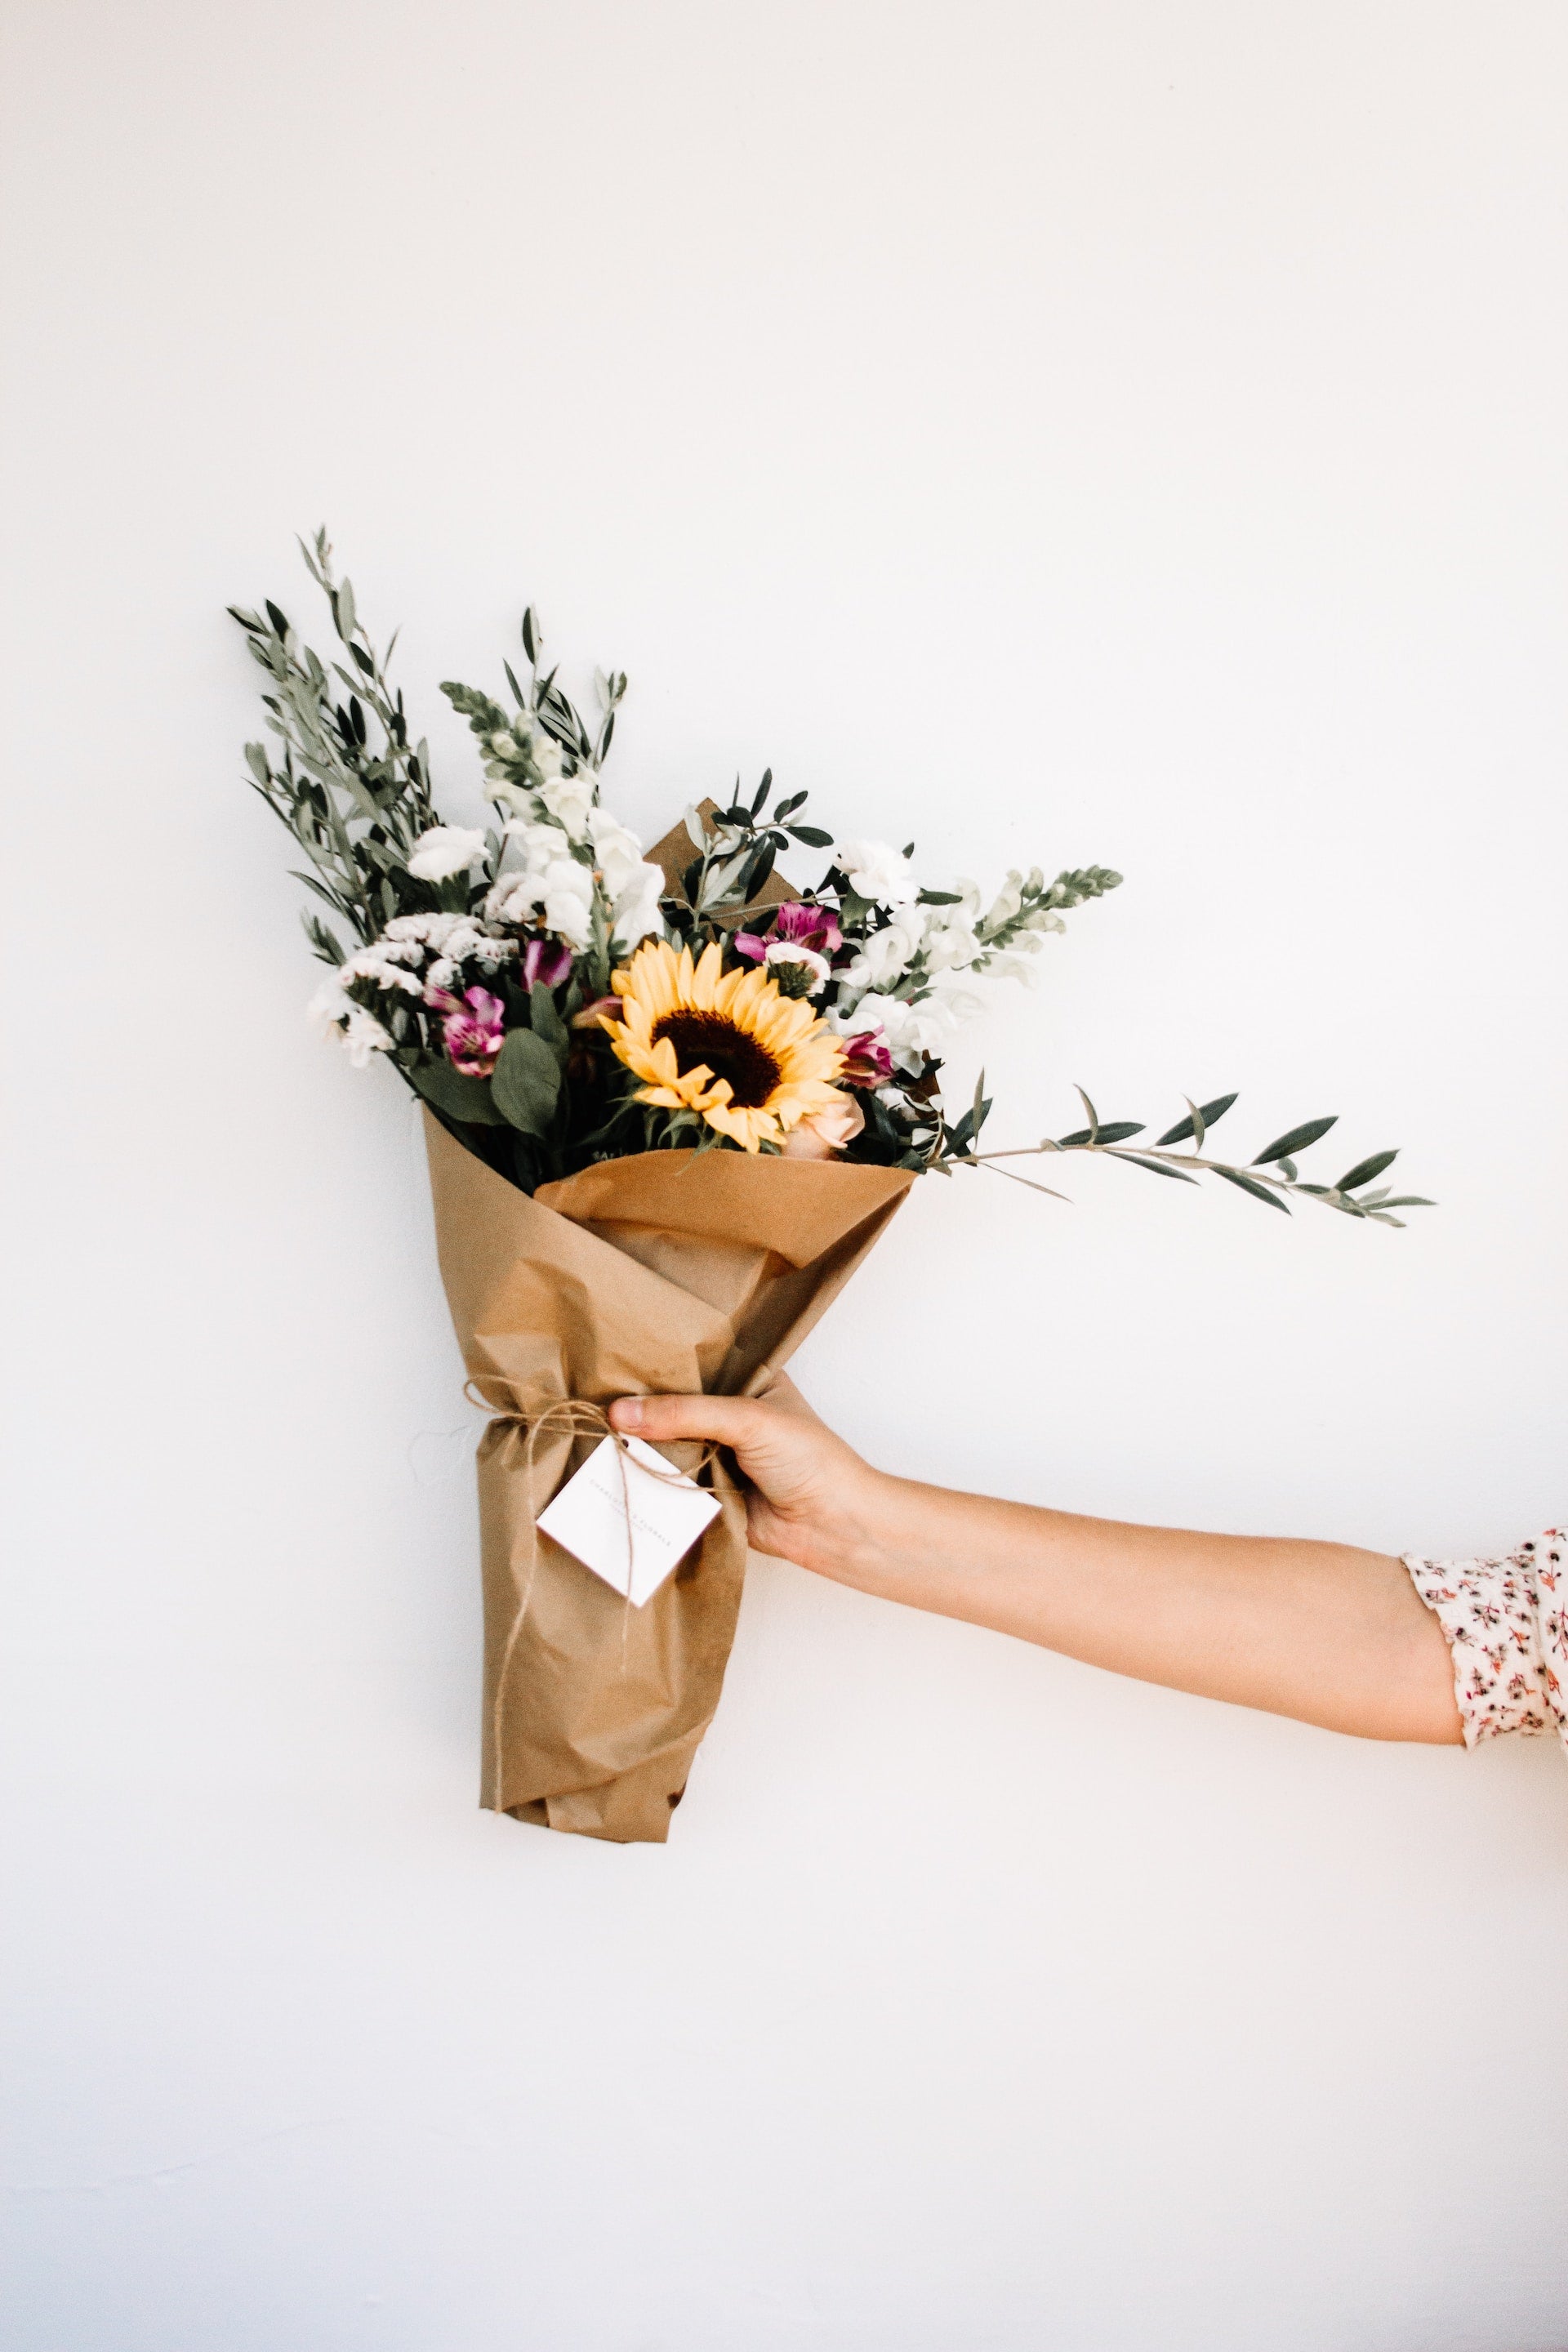 How to give a bouquet